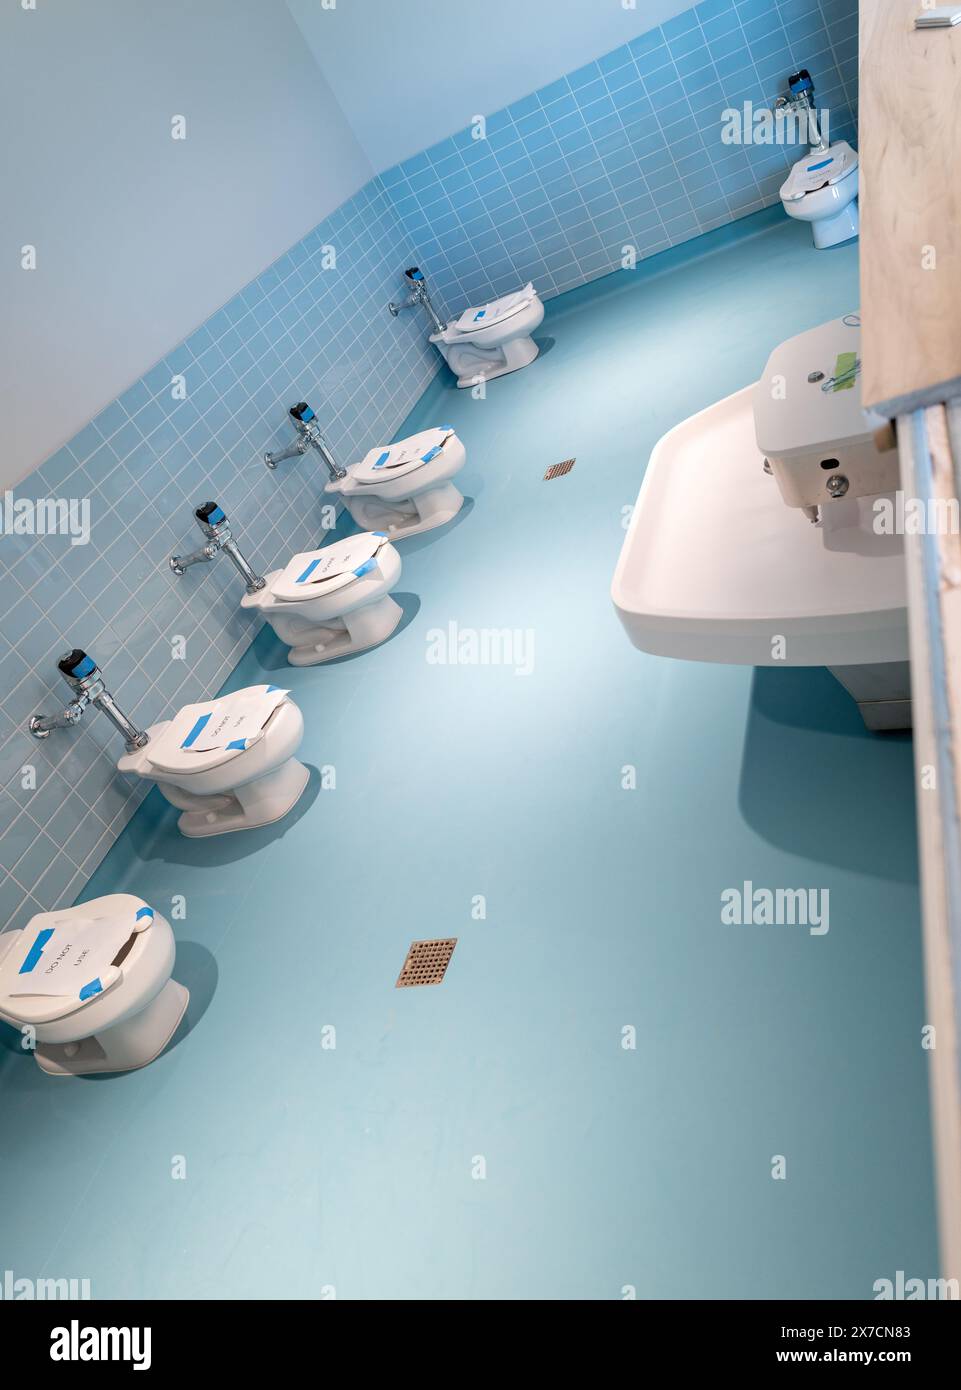 Washing and toilets Preschool bathroom for your children Stock Photo